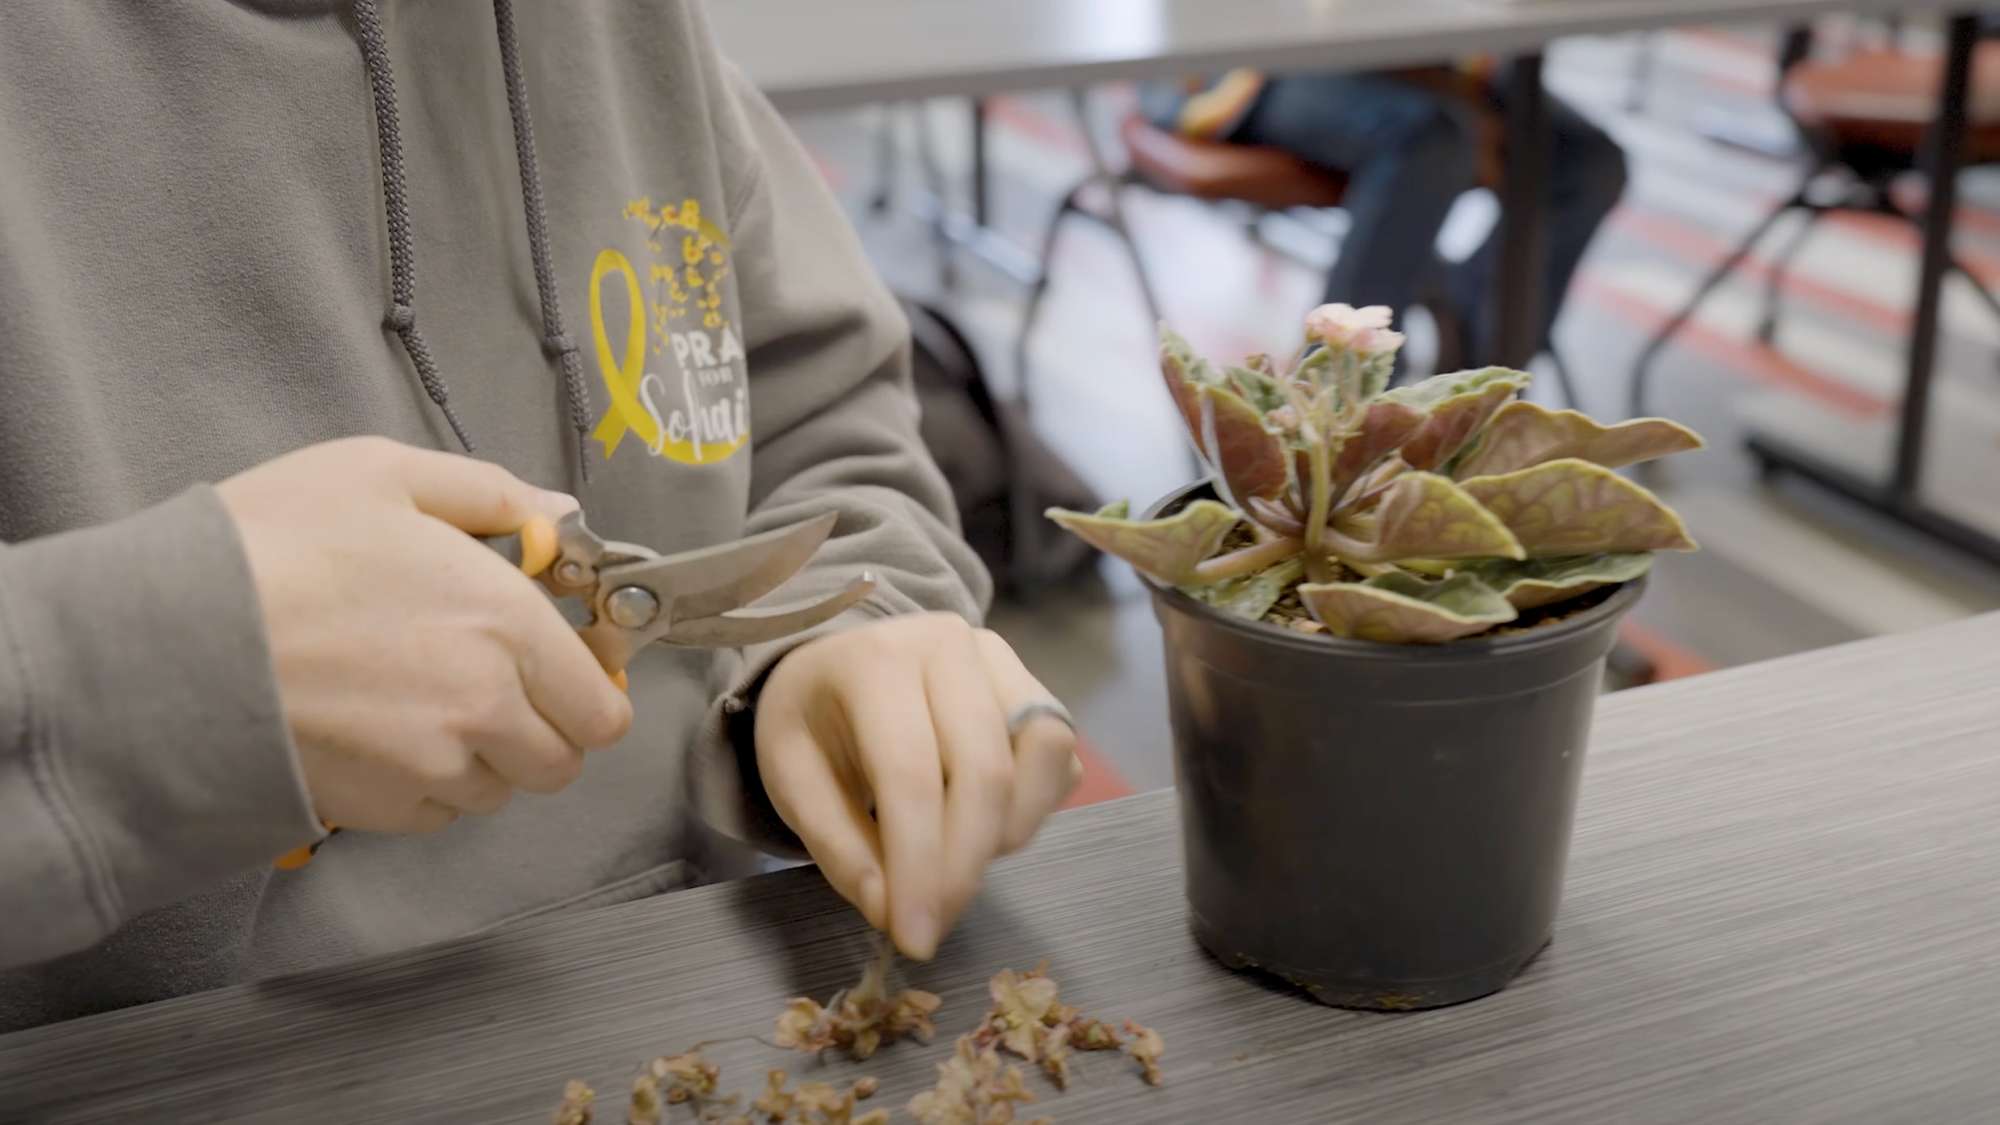 A student uses a small pruner on a potted plant which sits on a table.